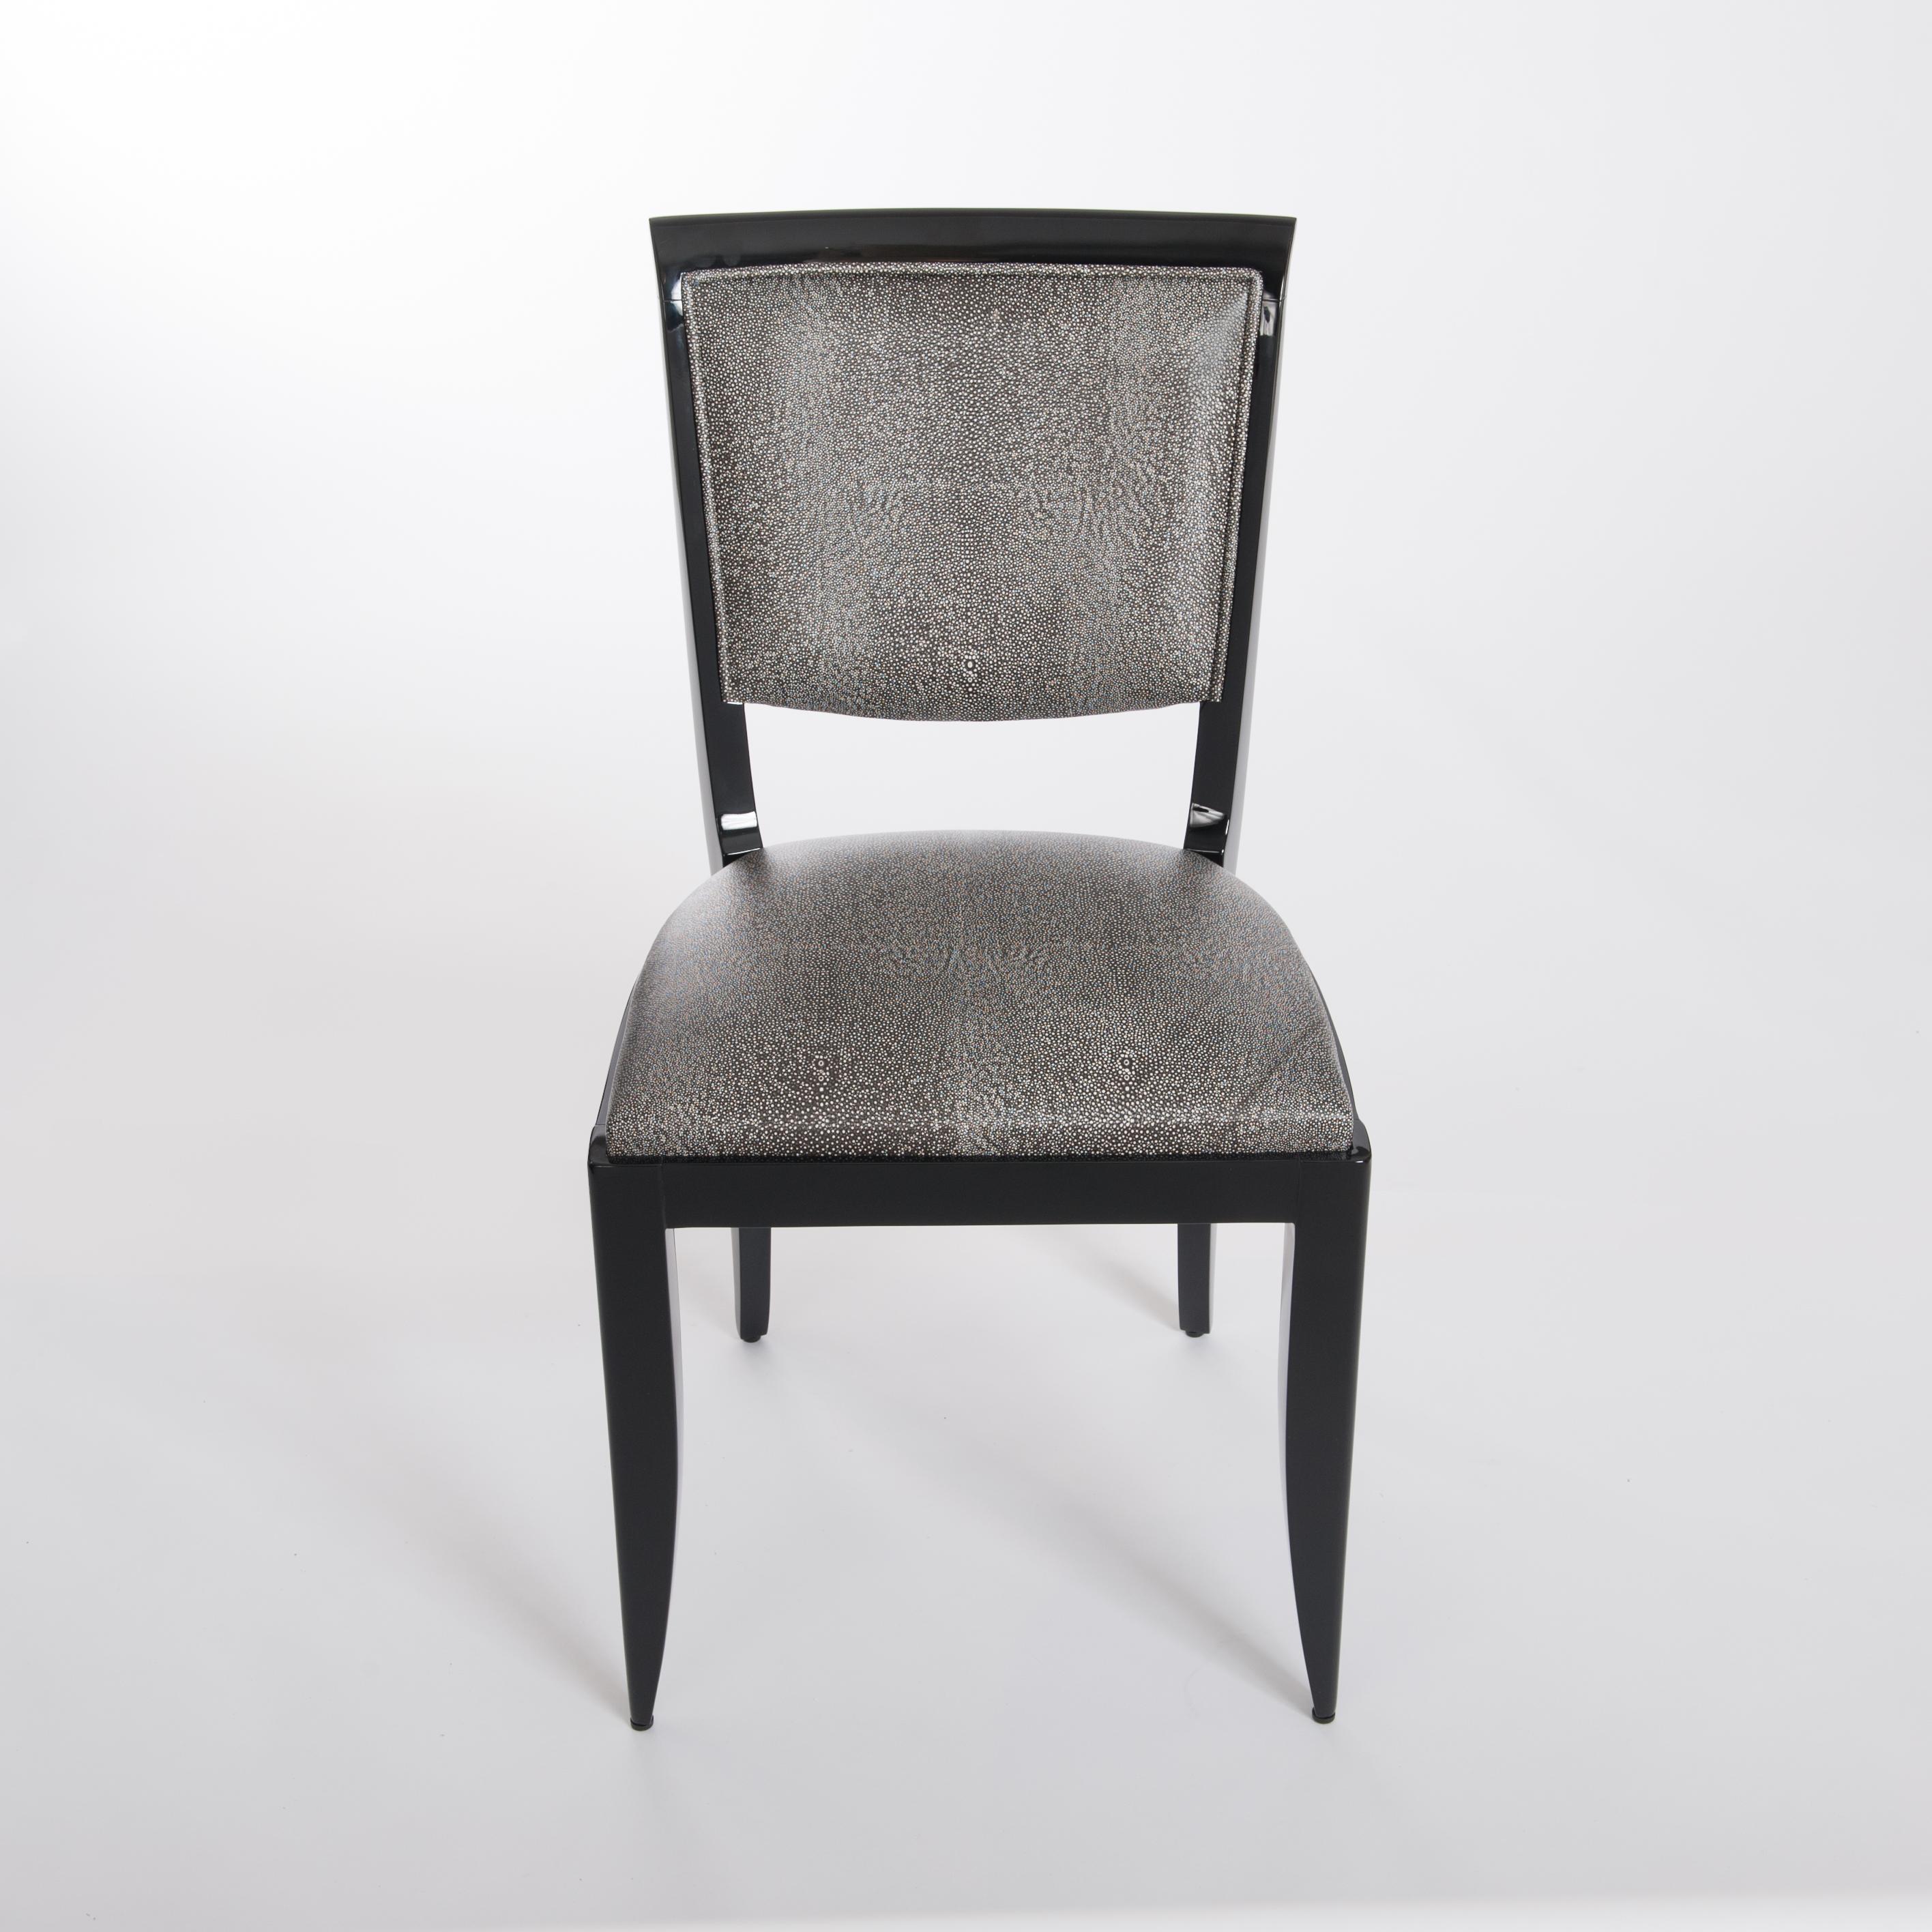 Set of six elegant and comfortable French Art Deco dining room chairs, re-lacquered wooden frame with black shiny-gloss and completely re-upholstered with black and white colored leather in raydesign.
The chairs are petite-light-footed and have